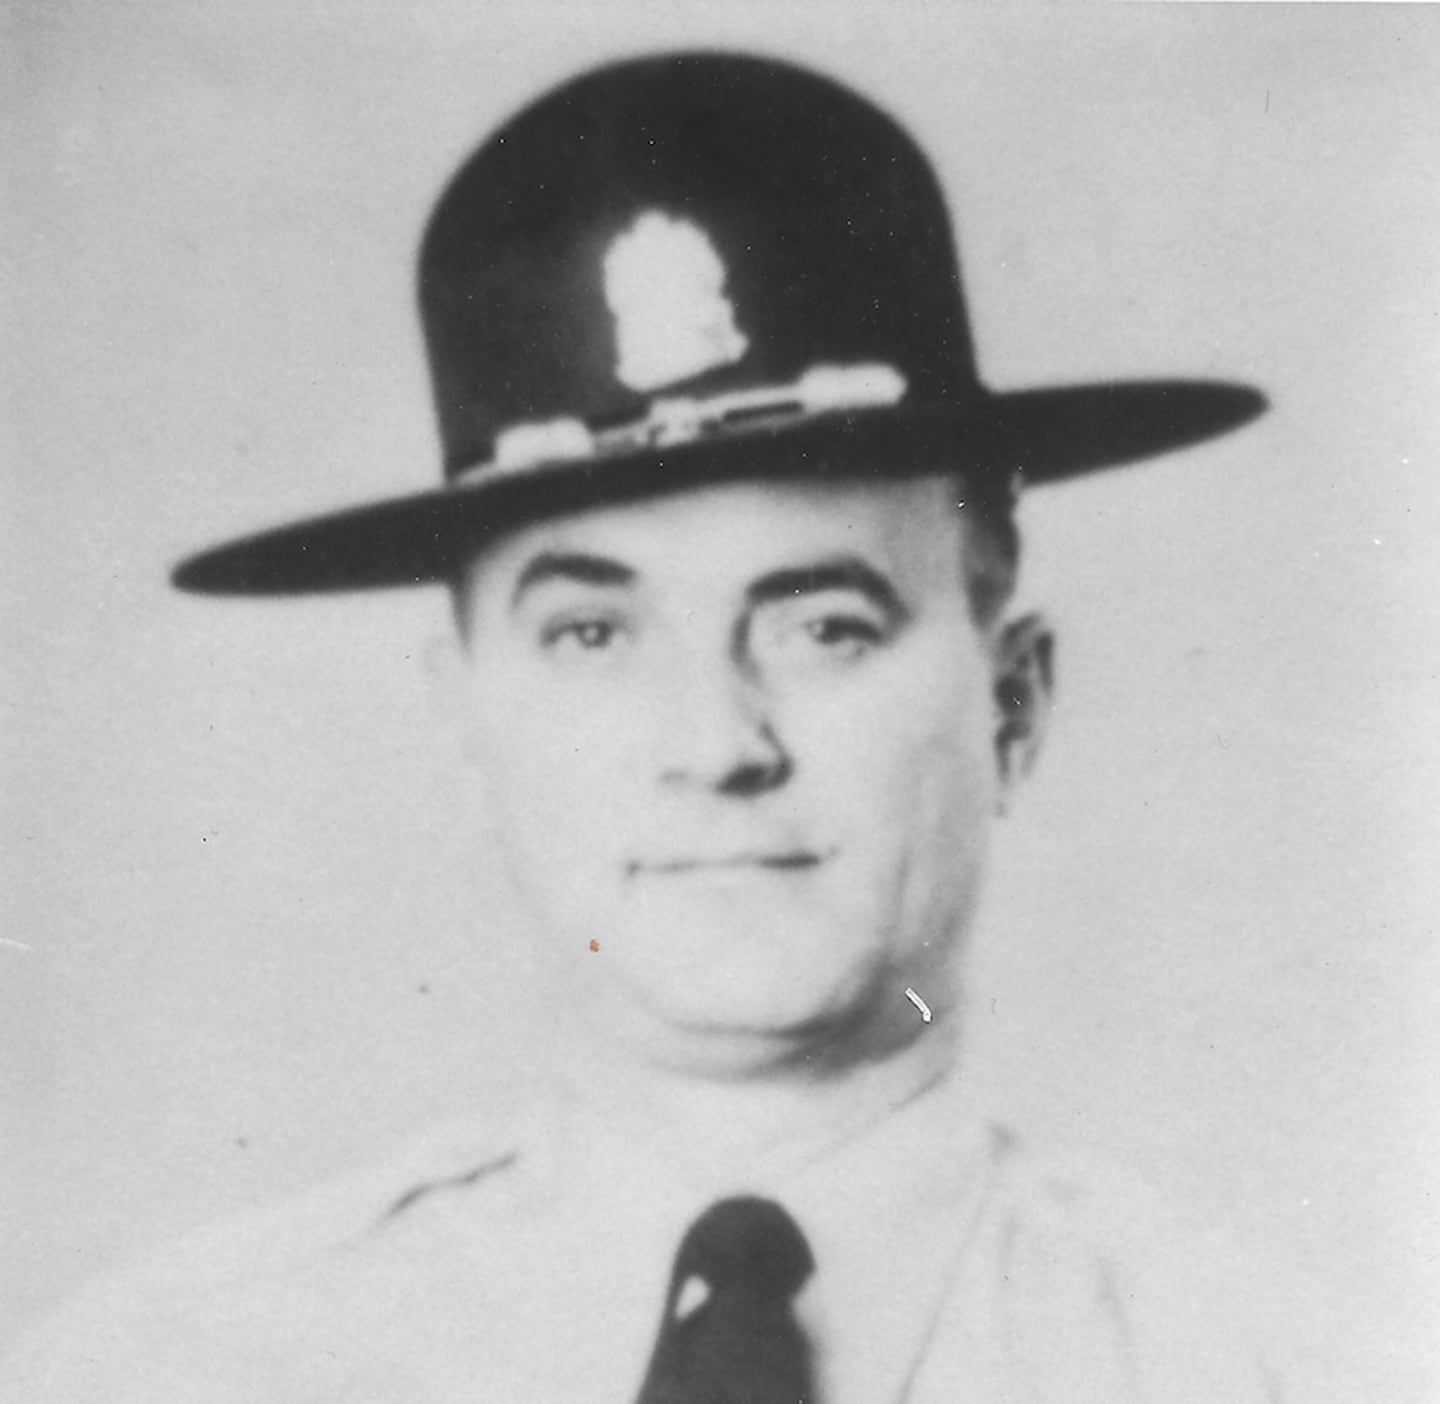 Photo of Illinois State Trooper Richard G. Warner, who was shot and killed in the line of duty on April 21, 1969.